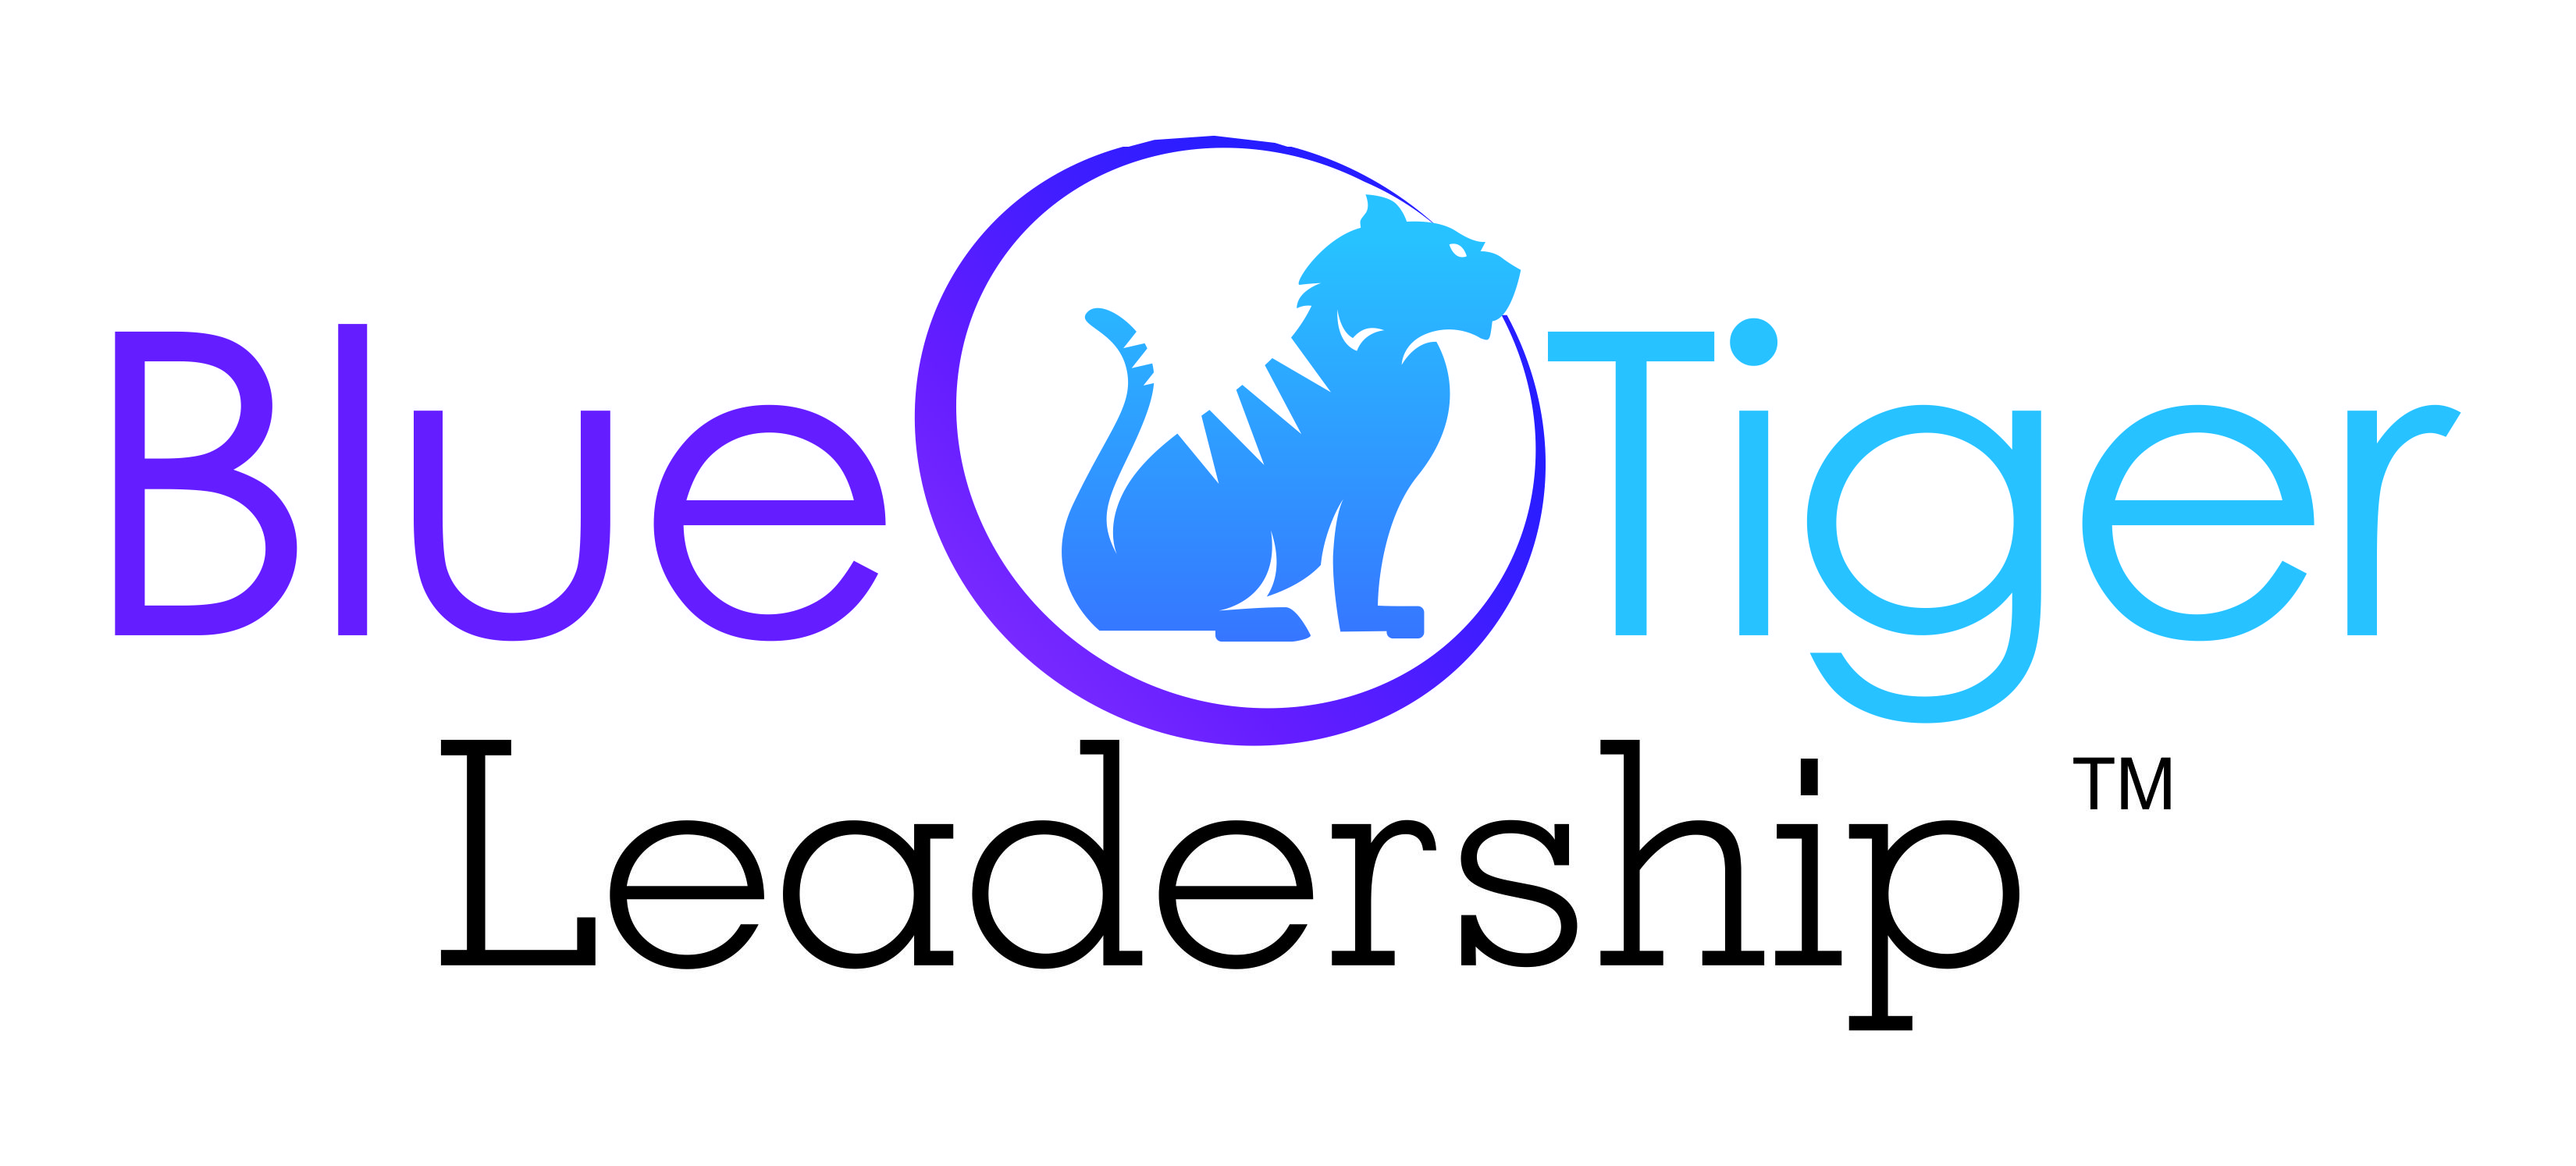 THRIVE Im+Powered Leader, The Competitive Edge of the Blue TIger